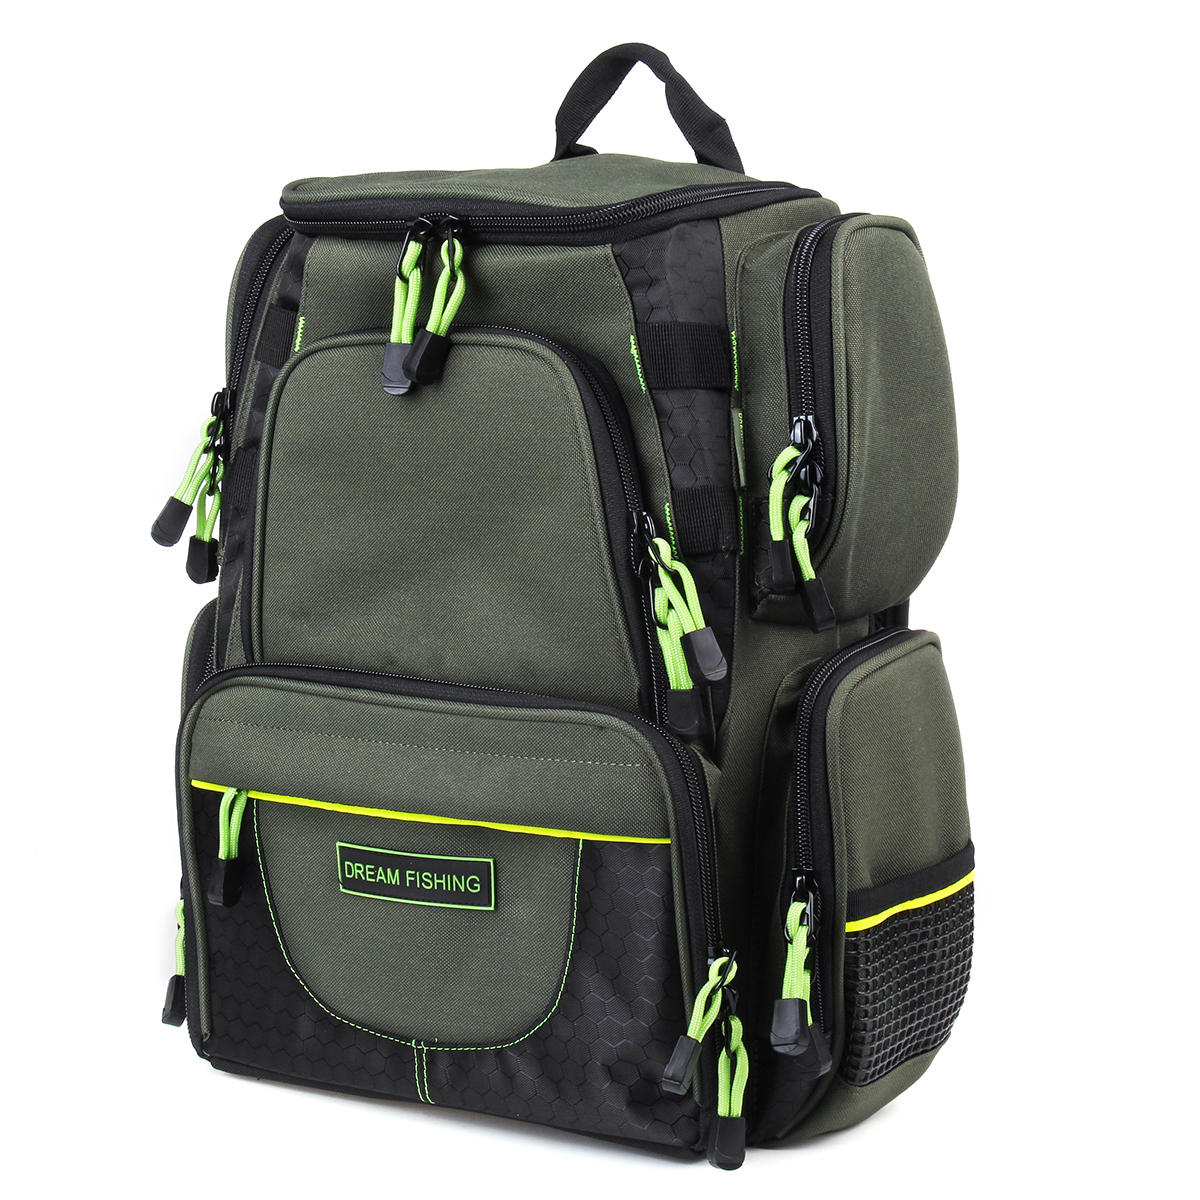 22/64l backpack fishing bag travel camping storage bag with lure boxes ...